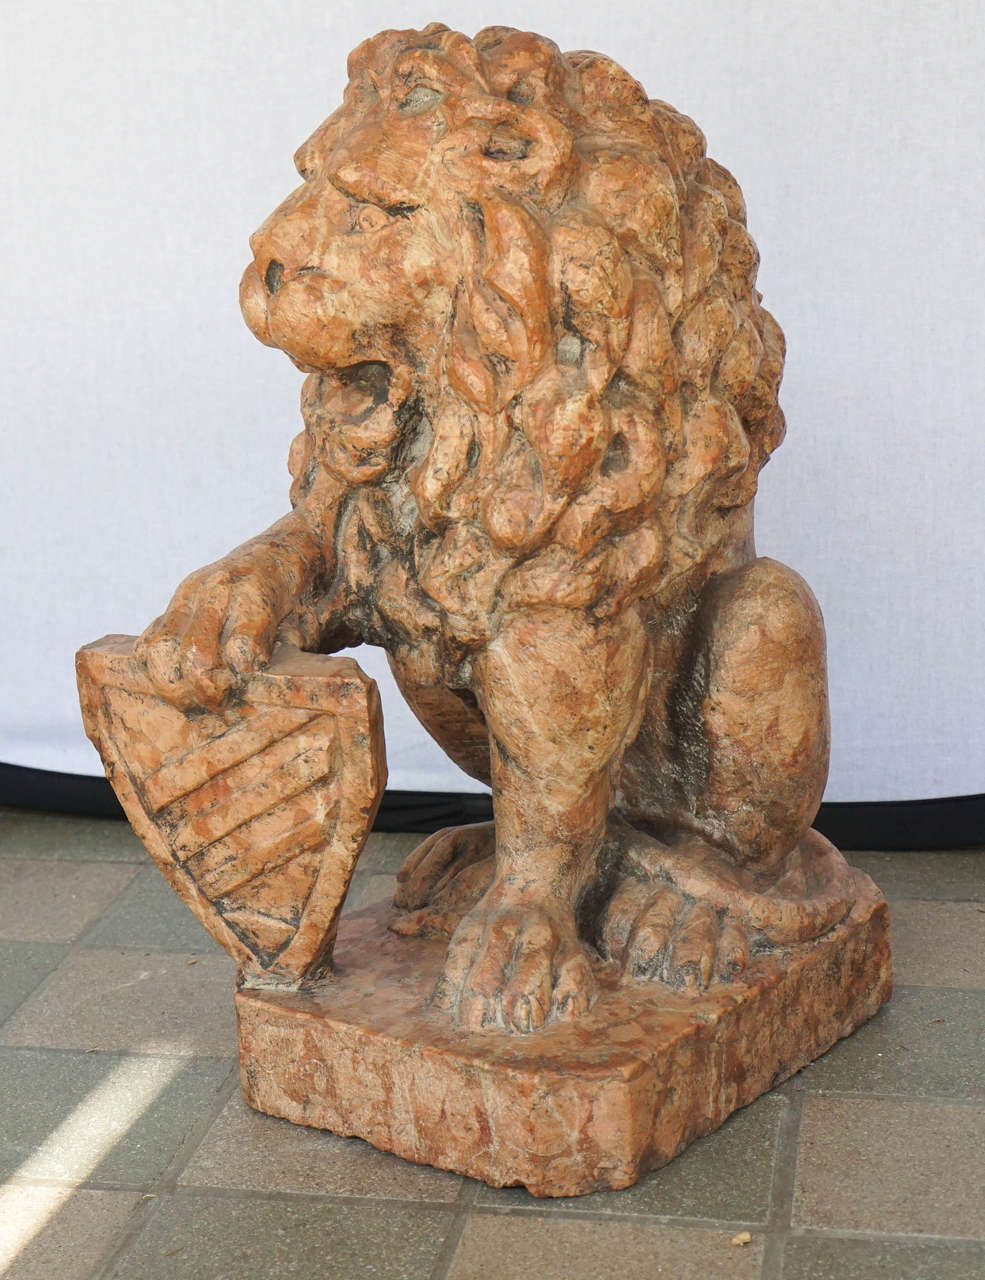 This fine and masculine sculpture of a rampant lion with shield was made in France around  1850 to 1860. Sculpted in a Baroque revival style likely as a heraldic device to denote property and family association the marble selection and power in the